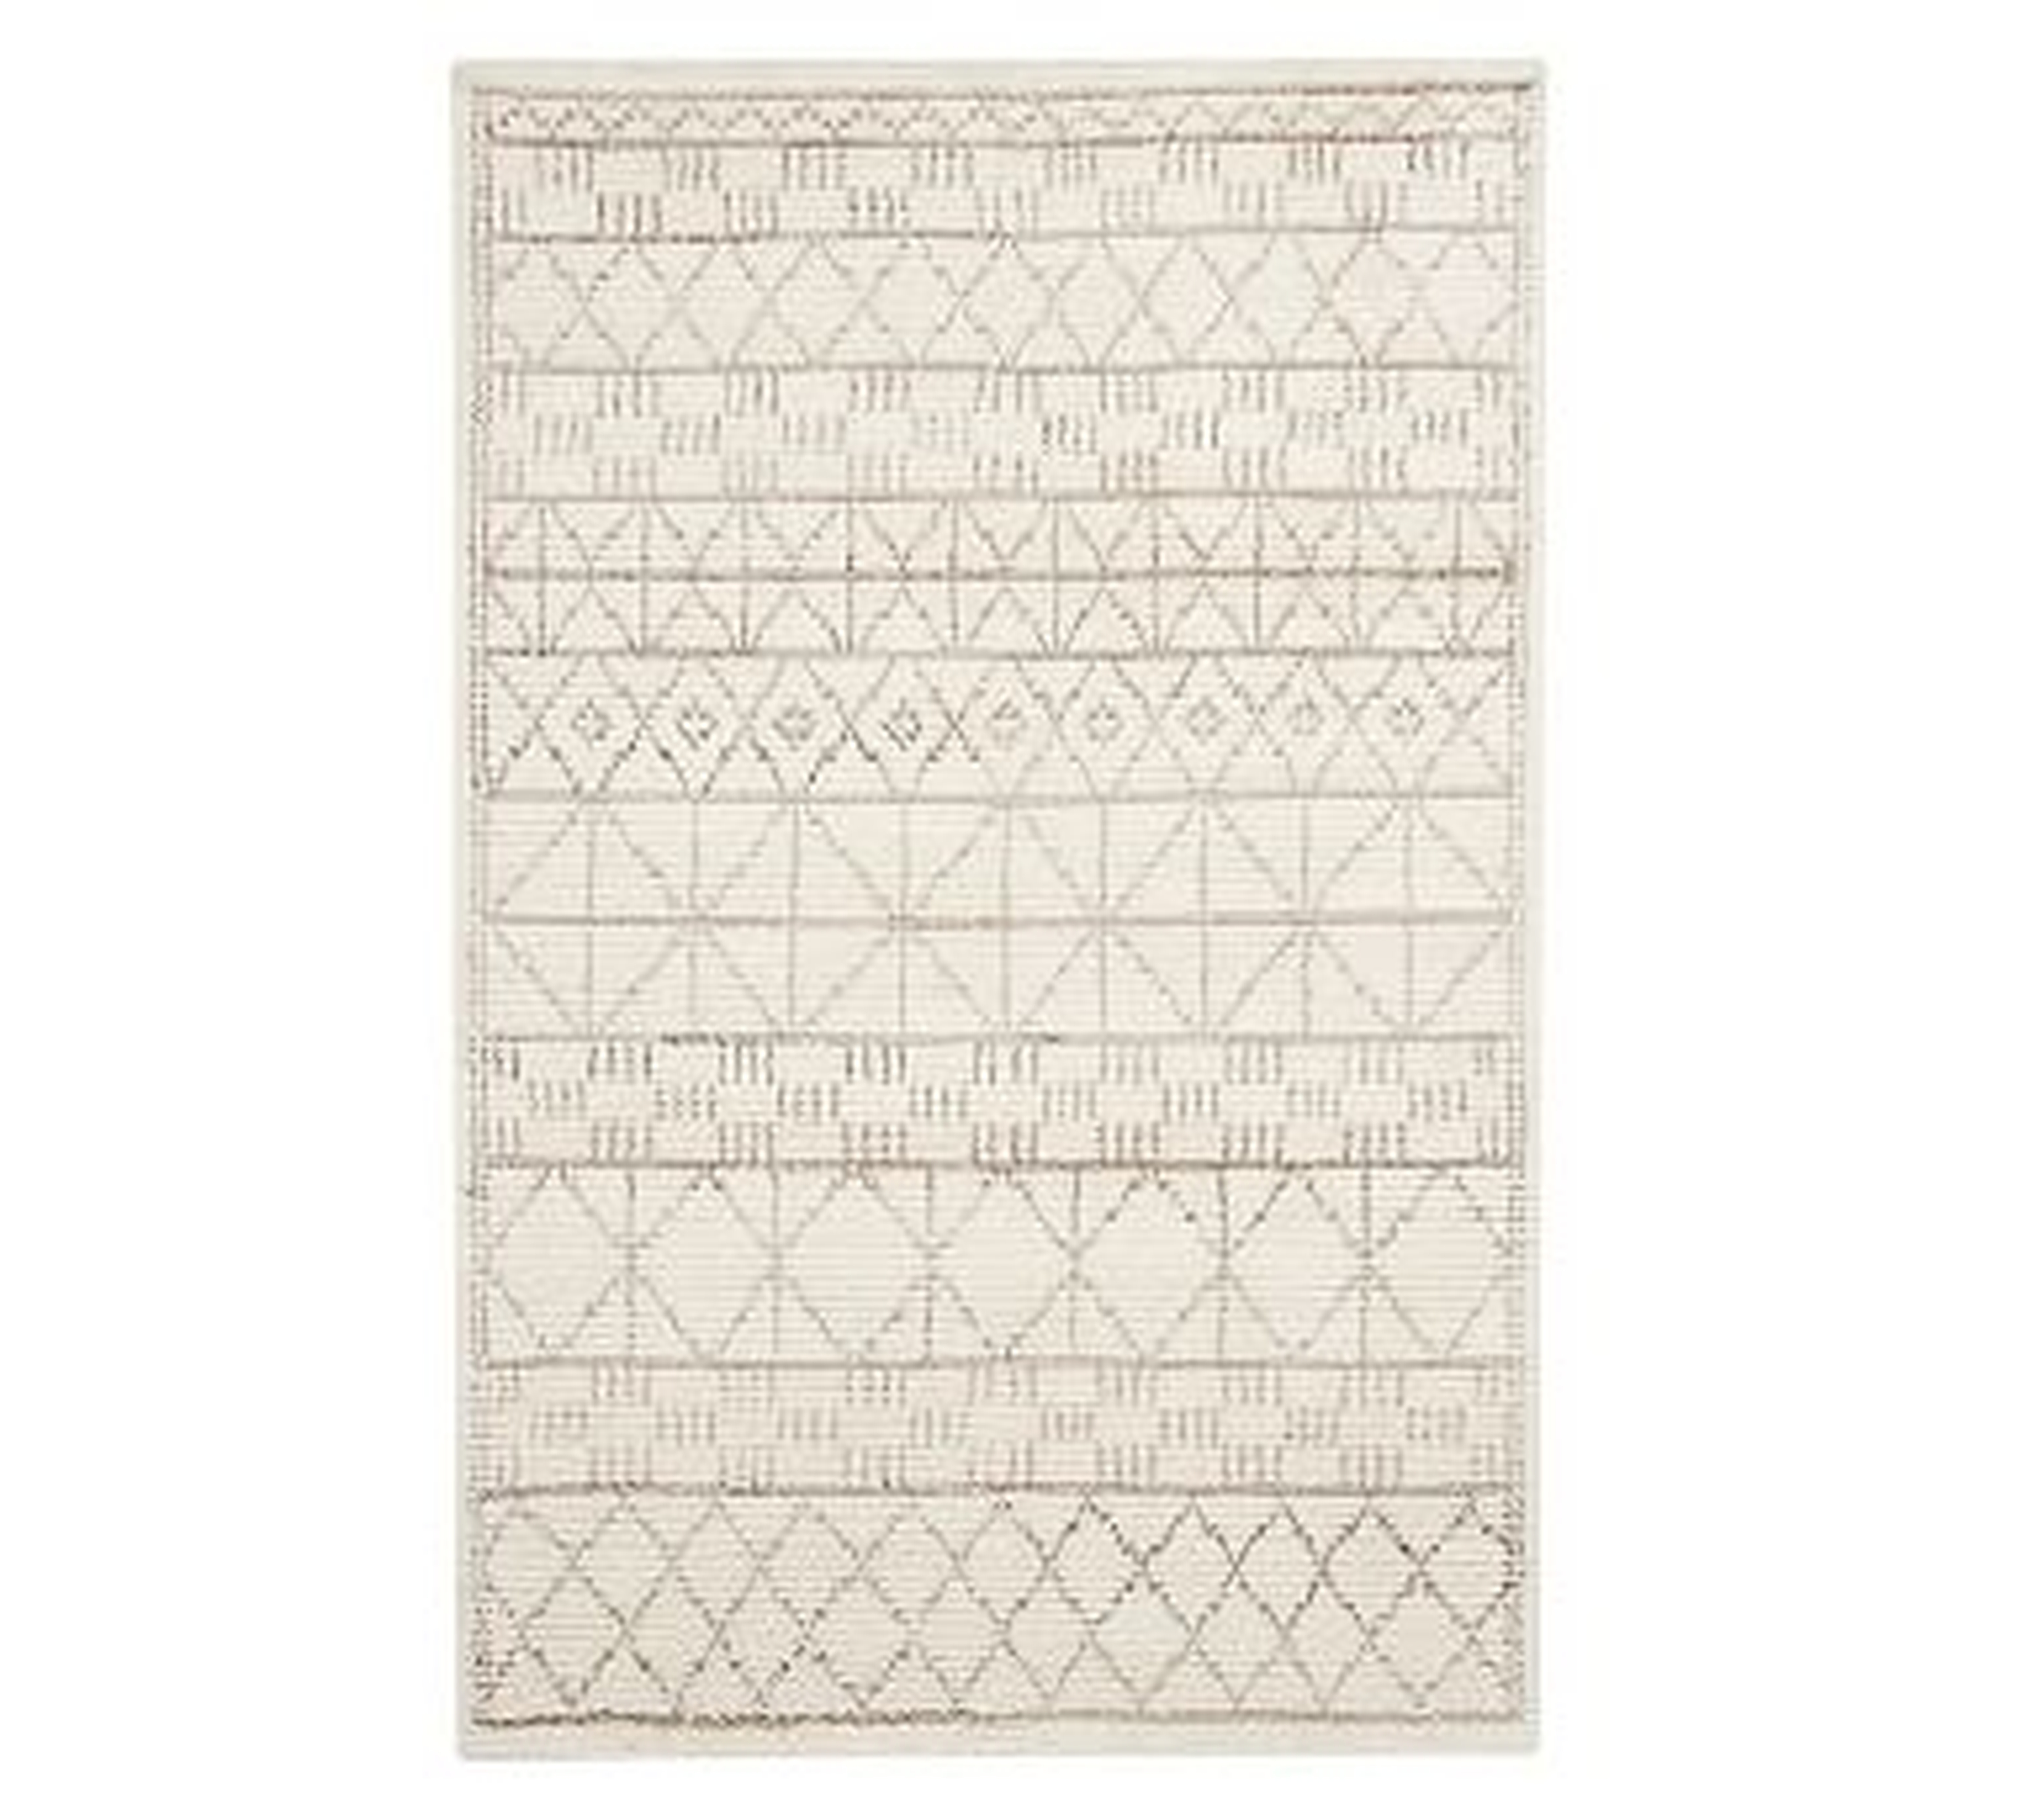 Carleigh Handknotted Rug, 8' x 10', Neutral - Pottery Barn